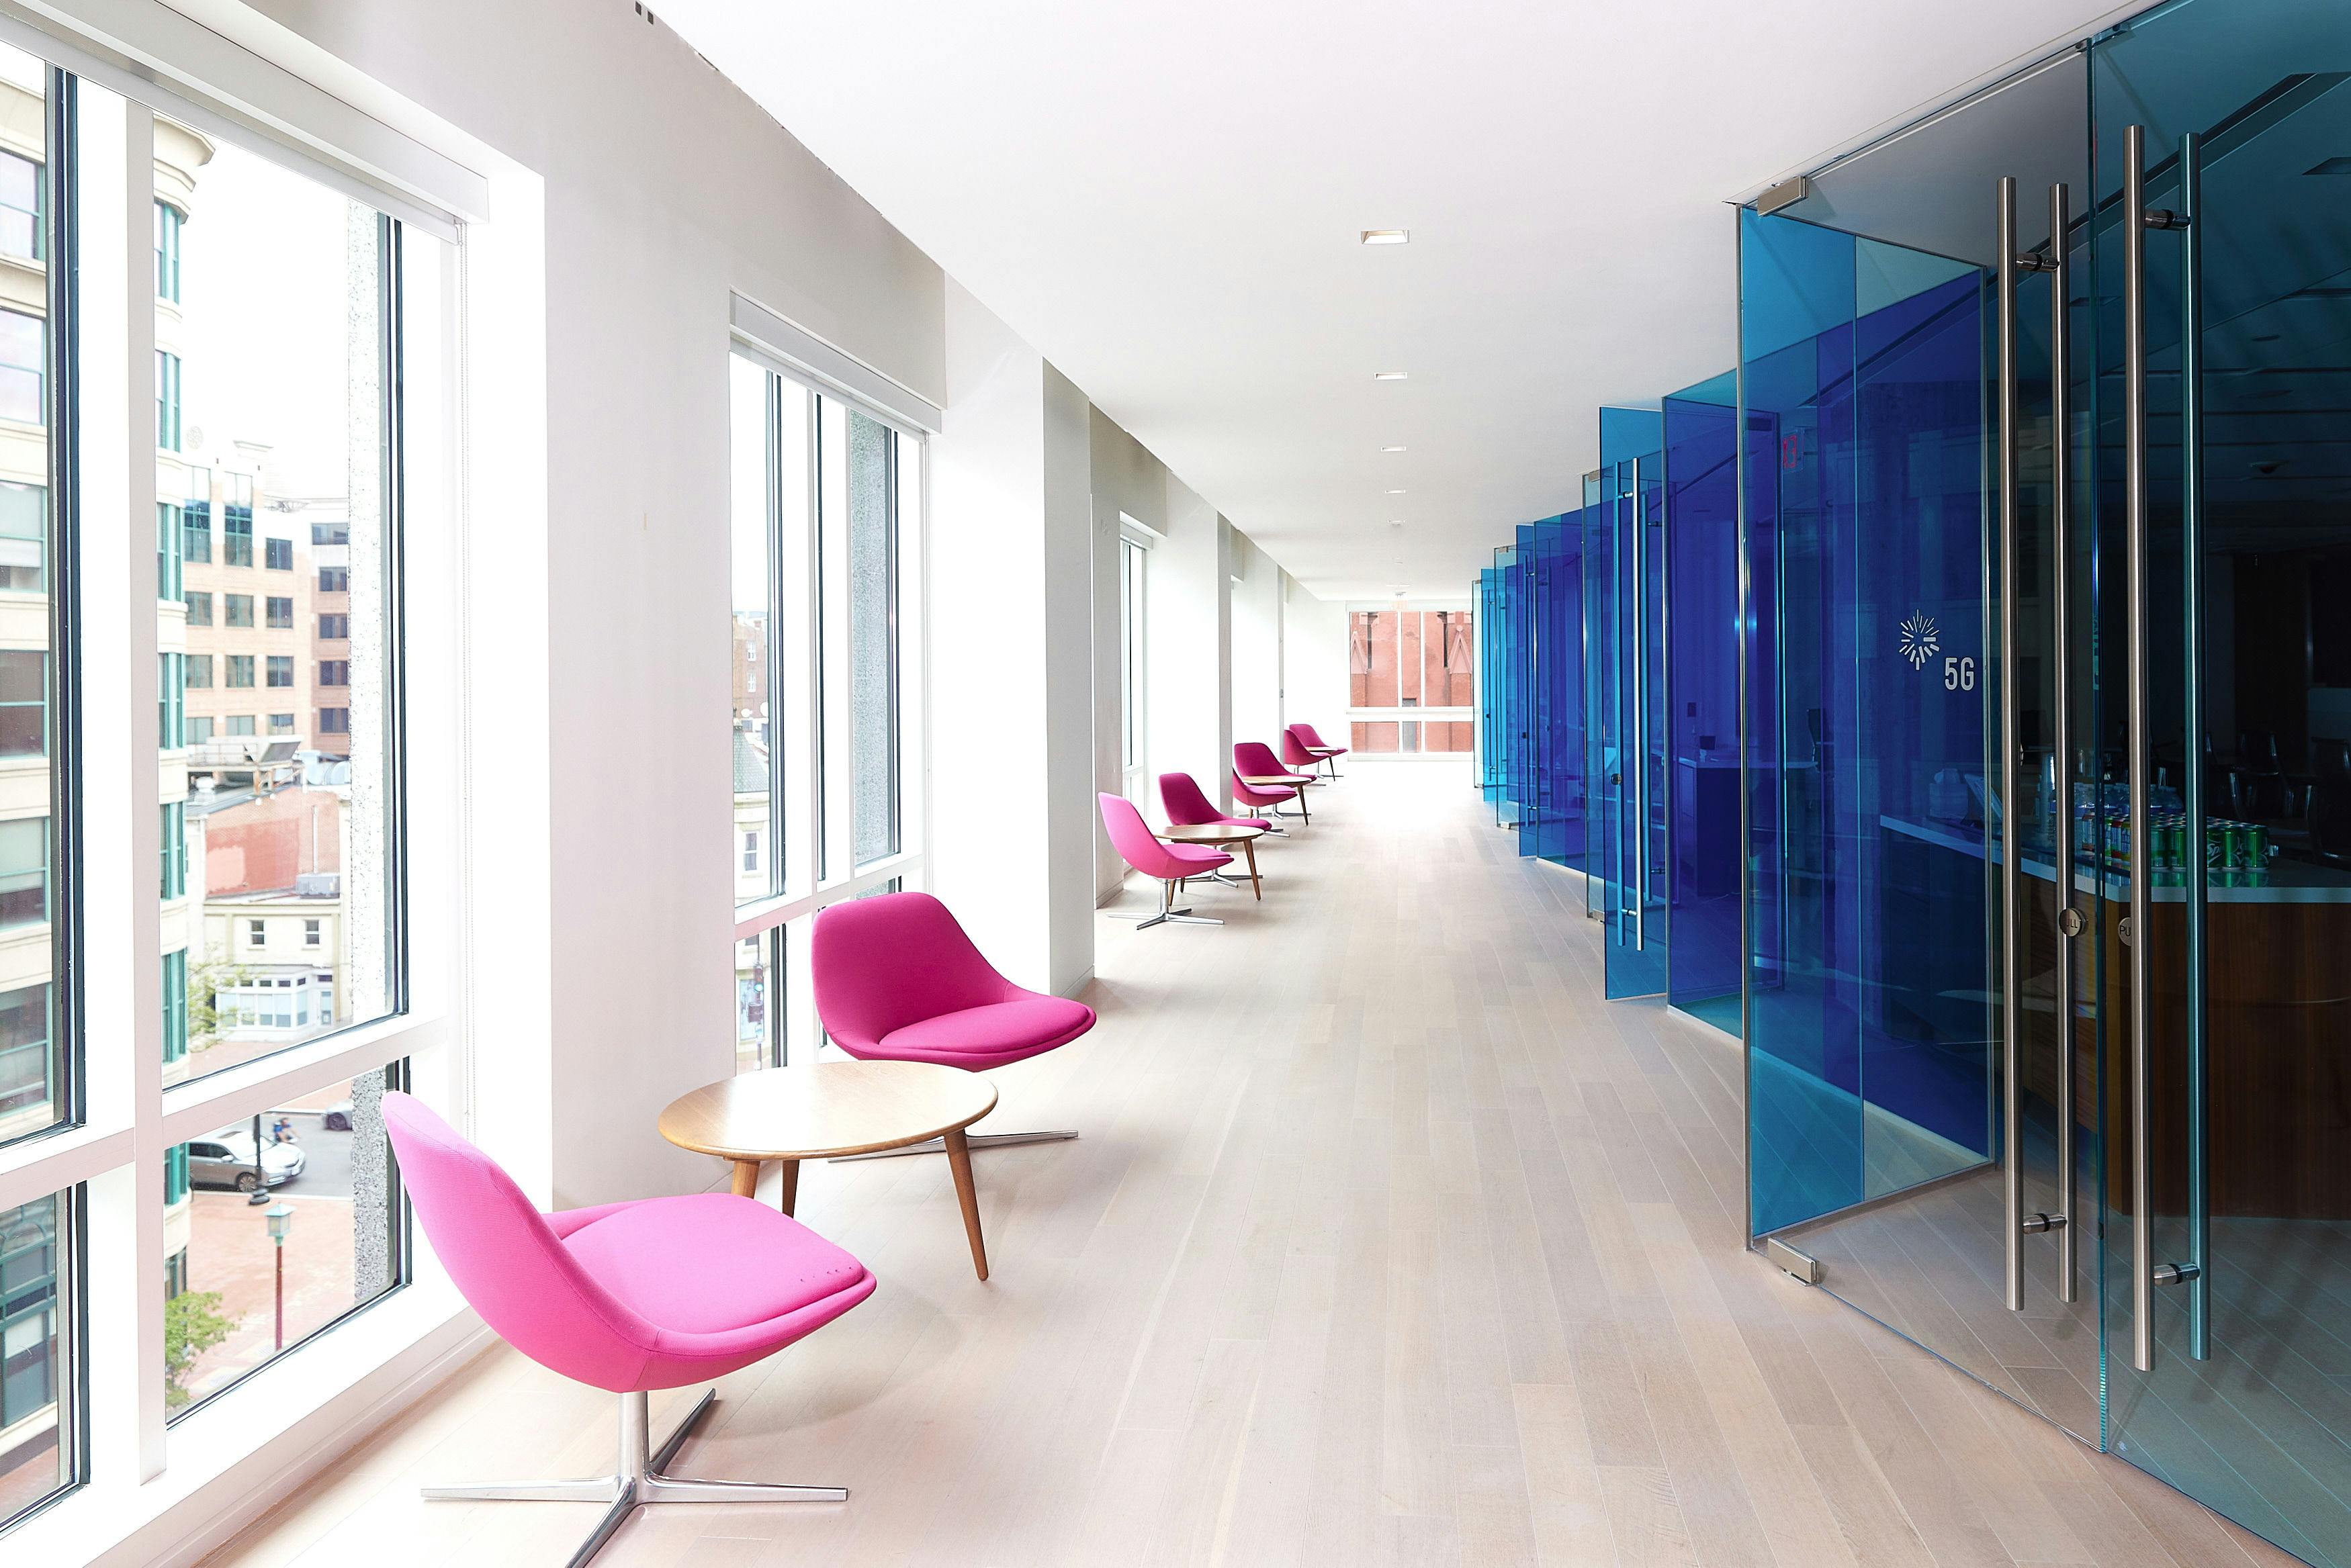 Hallway in Nixon Peabody's DC office; on the right are a series of small conference rooms, each one enclosed in blue-tinted glass; on the left pink chairs and small round wooden tables stretch into the distance along a row of floor-to-ceiling windows